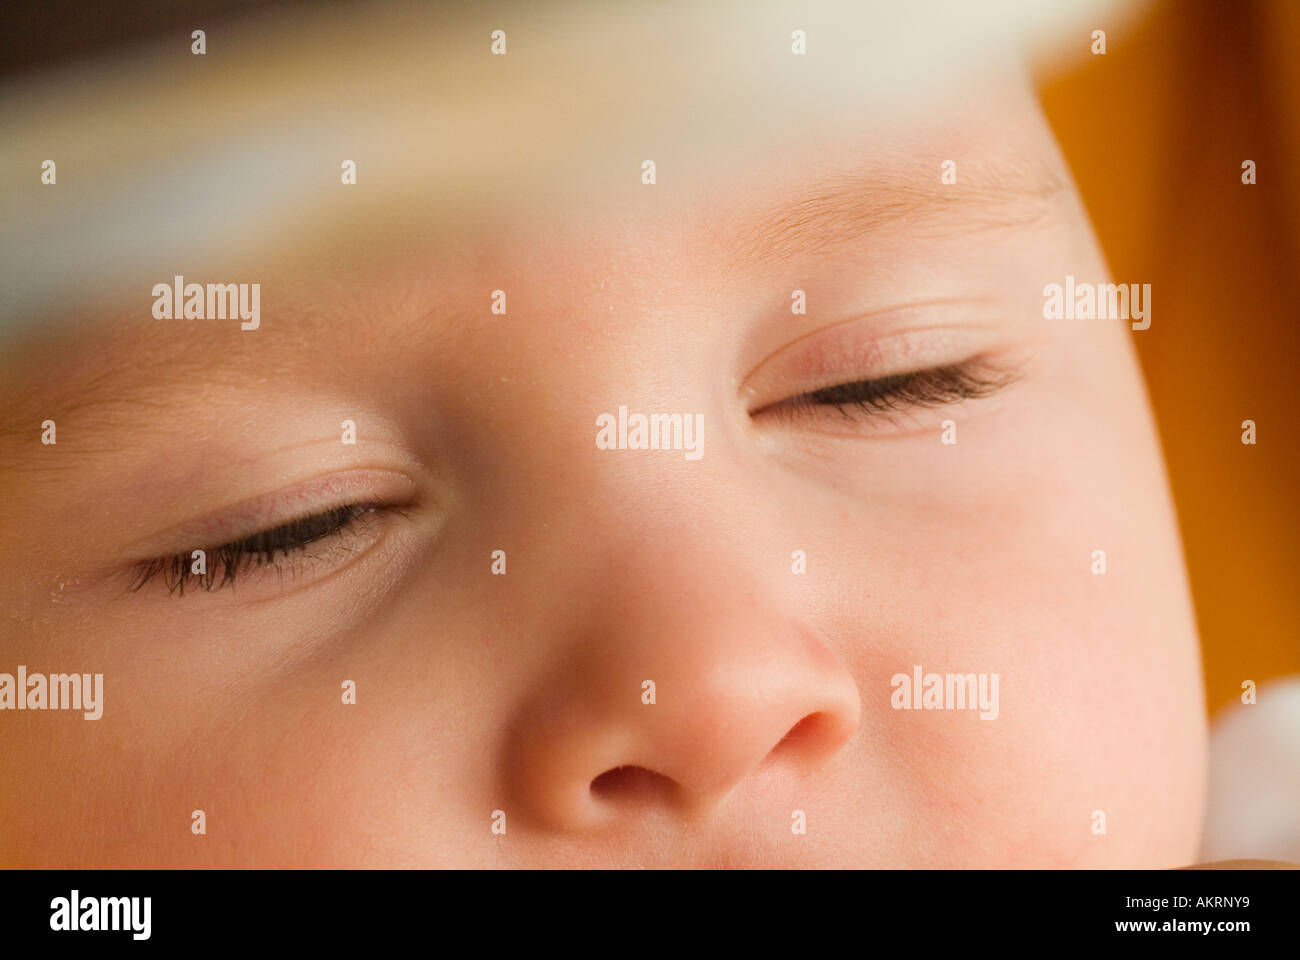 tired eyes of a baby of 8 months Stock Photo